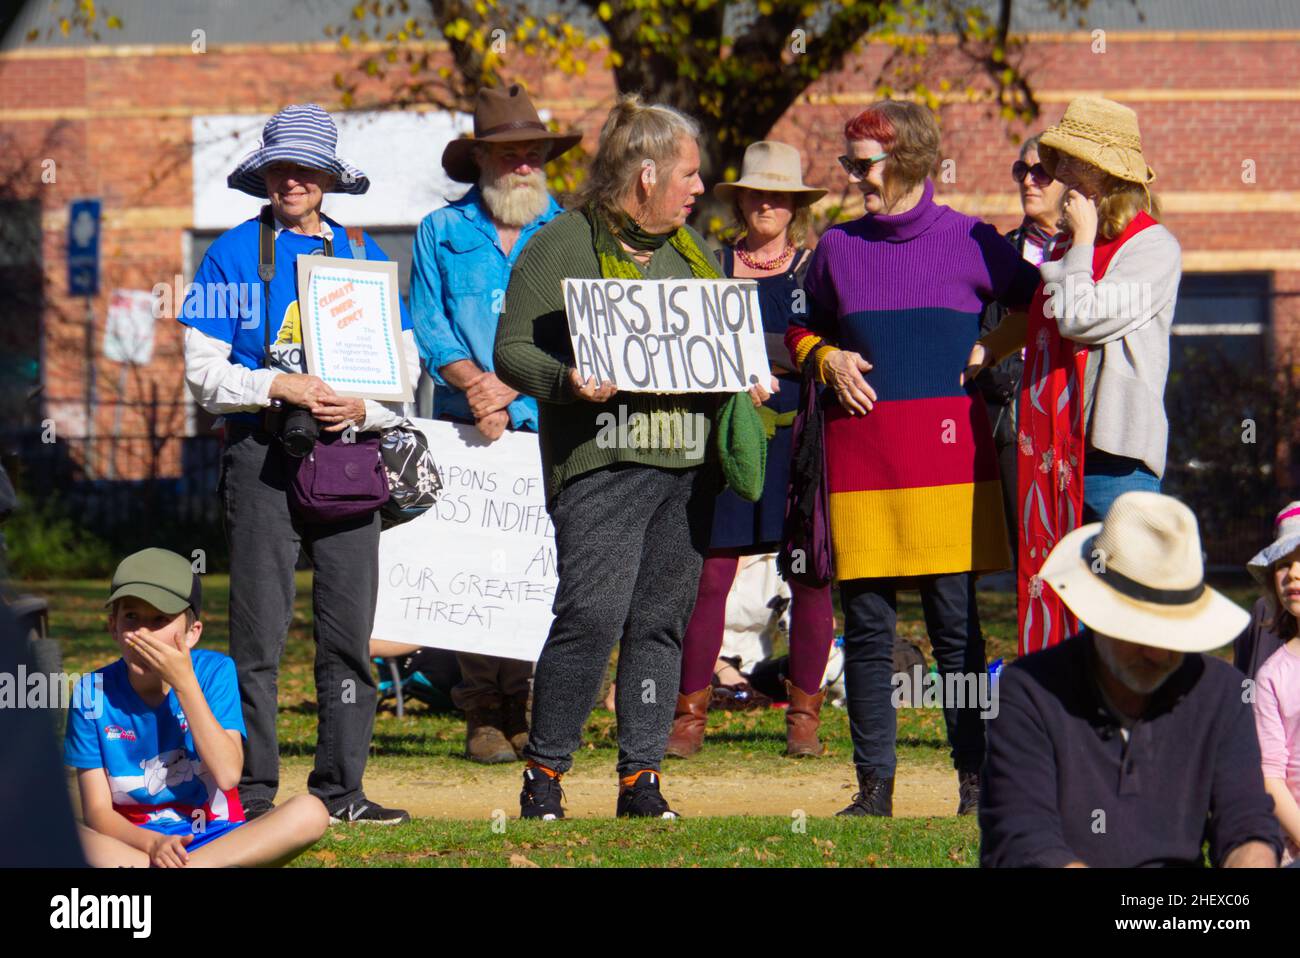 Climate change protest sign and people demonstration rally for saving the environment, Castlemaine, Victoria, Australia. Stock Photo